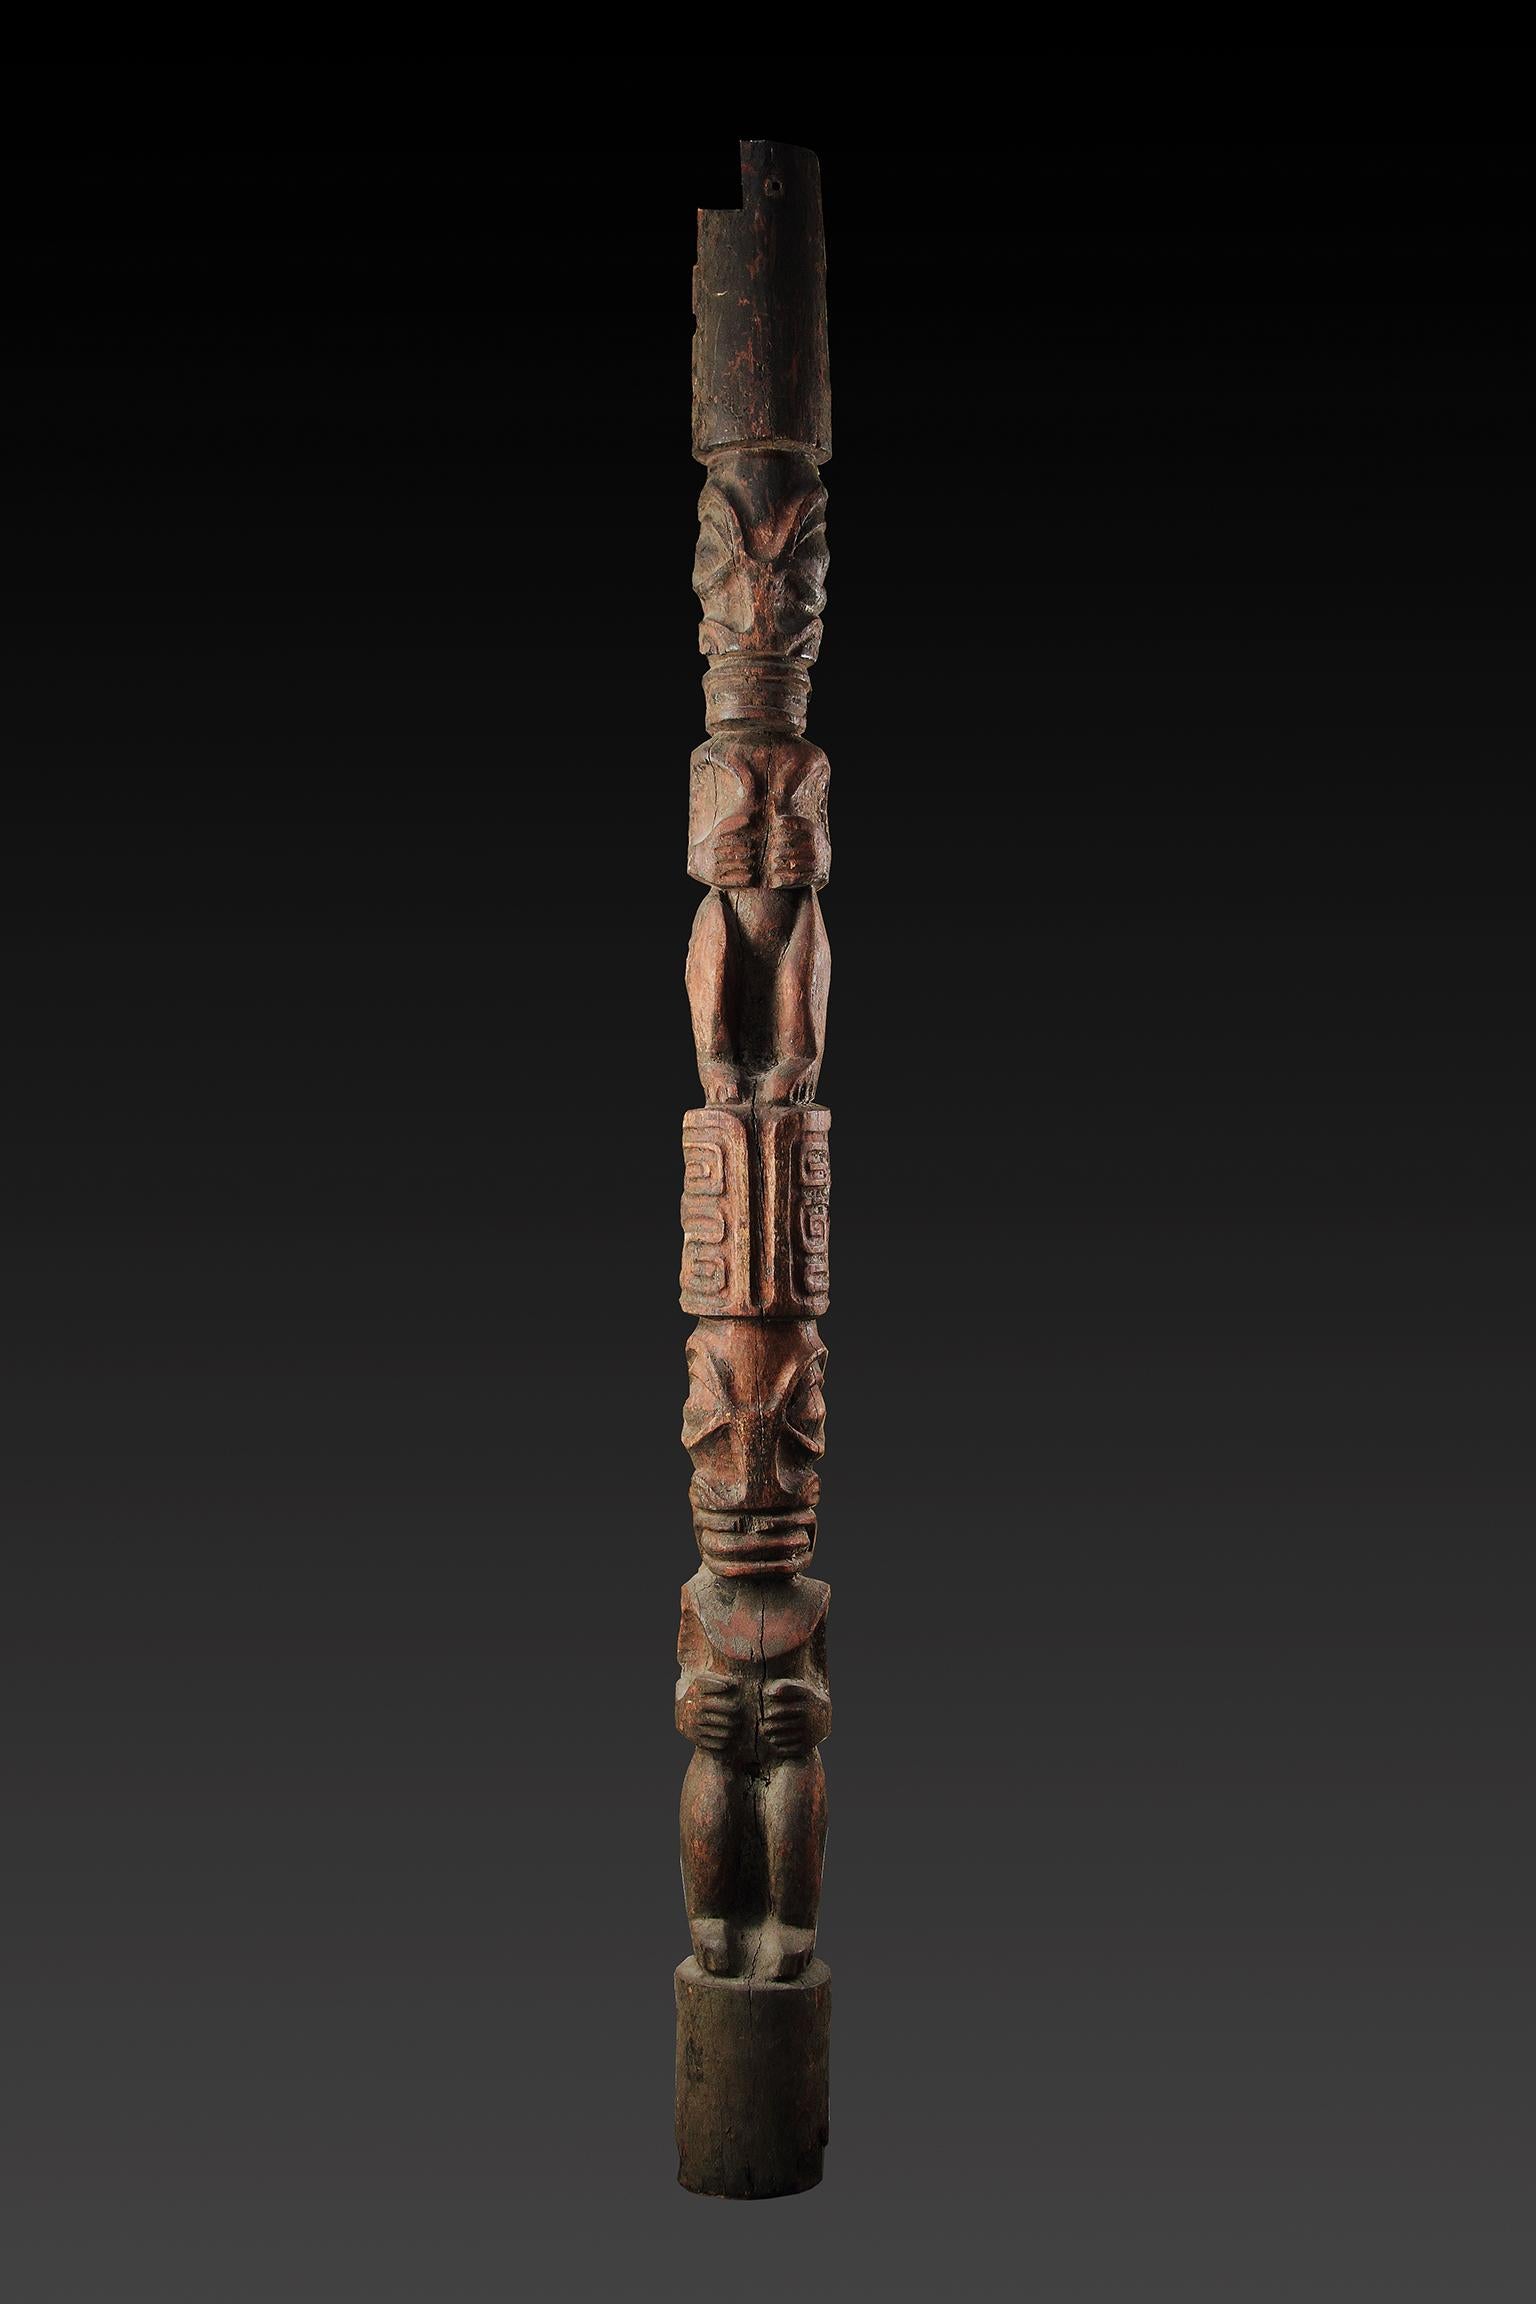 A Very Large French Polynesian Marquesas Islands Nuku Hiva House Post Carved with Ritual Tiki Figures 
Late 19th Century - Early 20th century 

Size: 288cm high - 113½ ins high / 9 feet 5½ ins 

These large human images are the most imposing of all